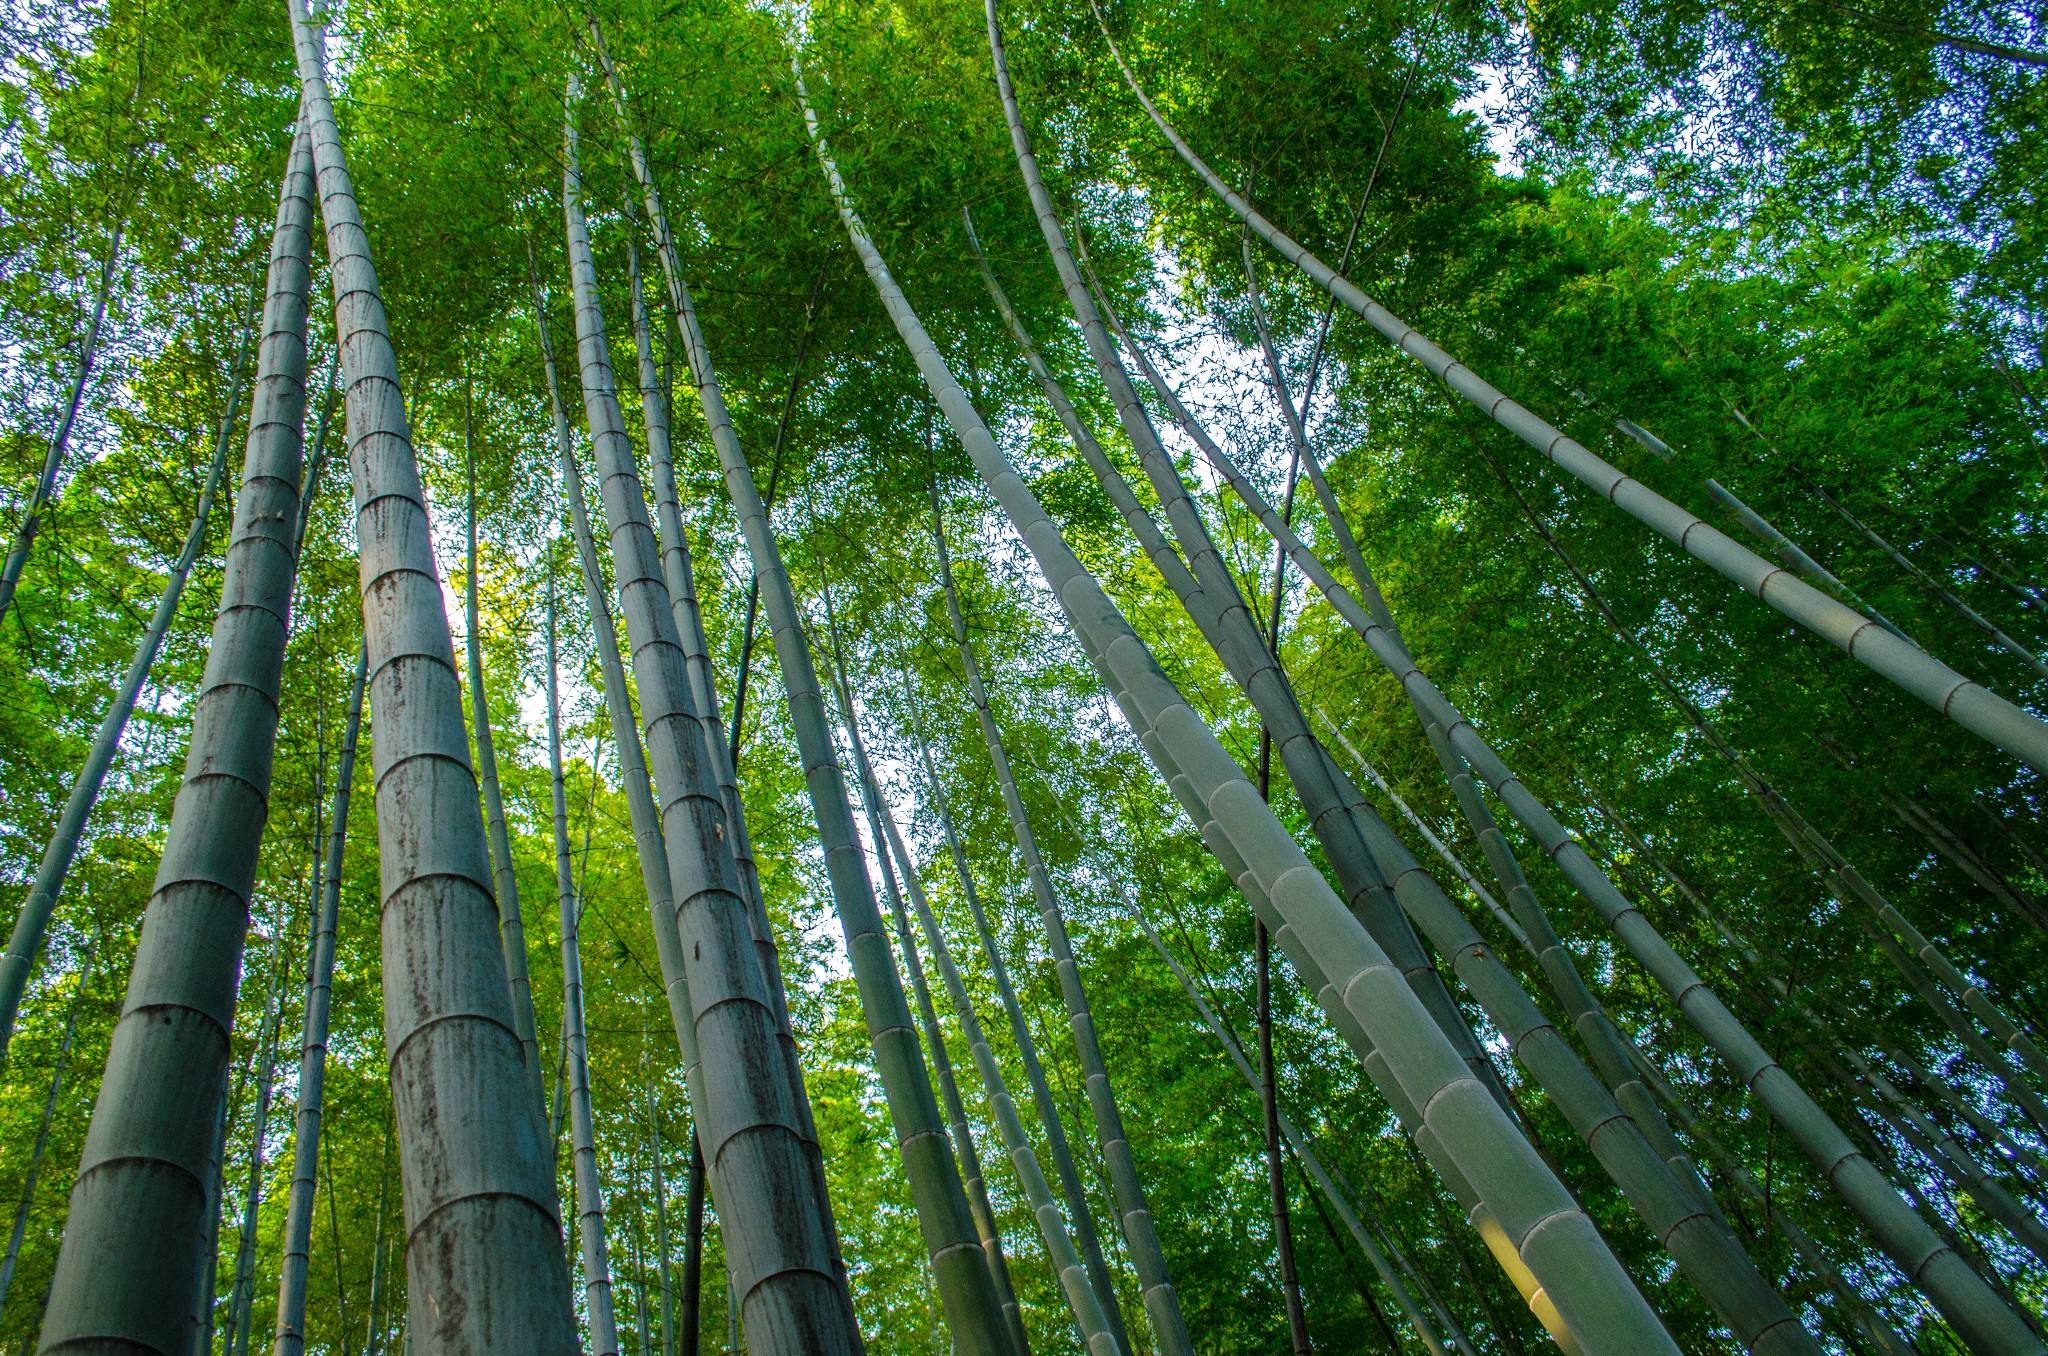 Southern_Sichuan_Bamboo_Forest.jpg